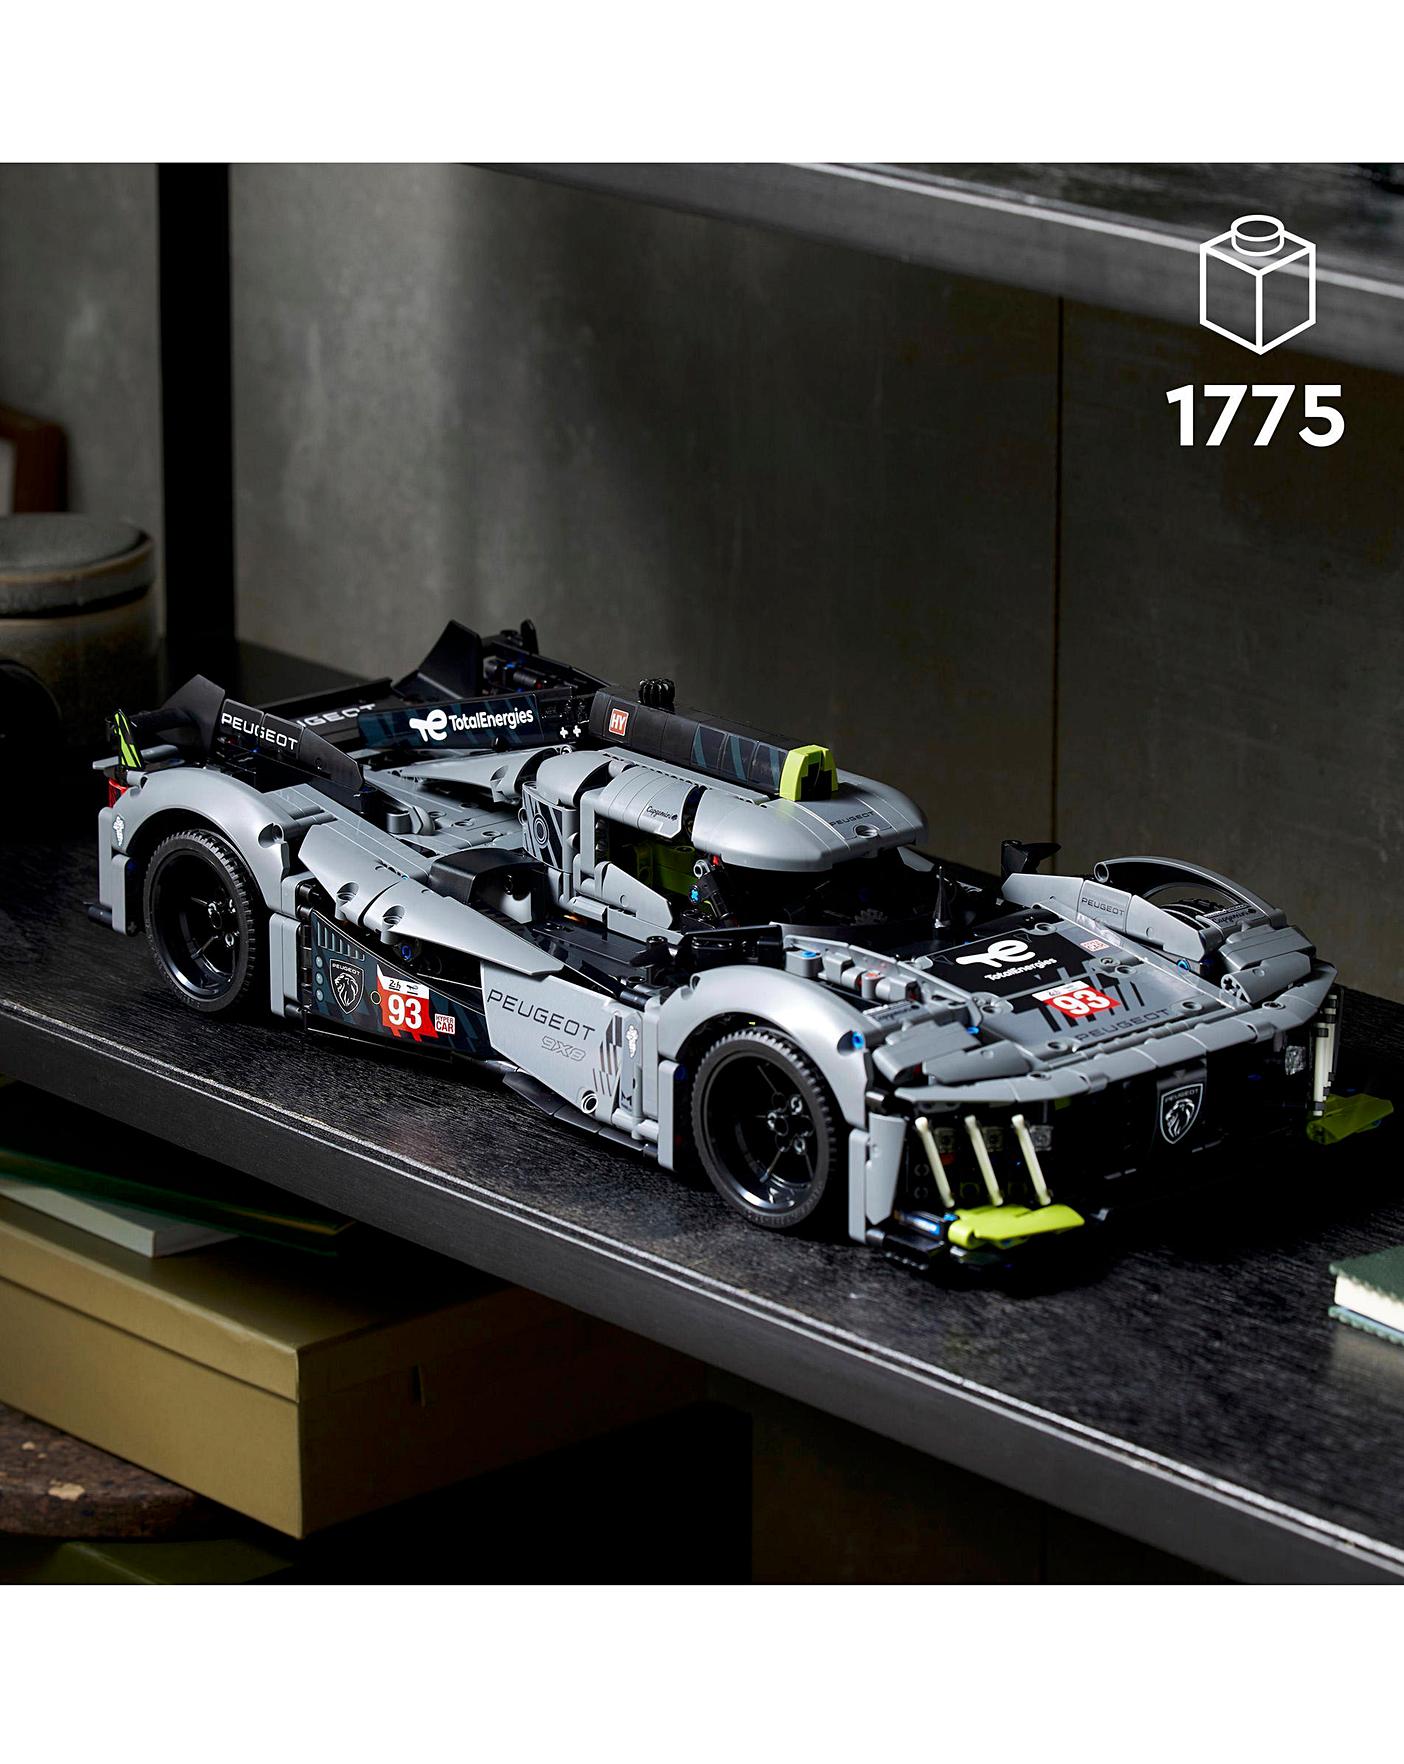 Here's how they made the Lego Peugeot Le Mans car